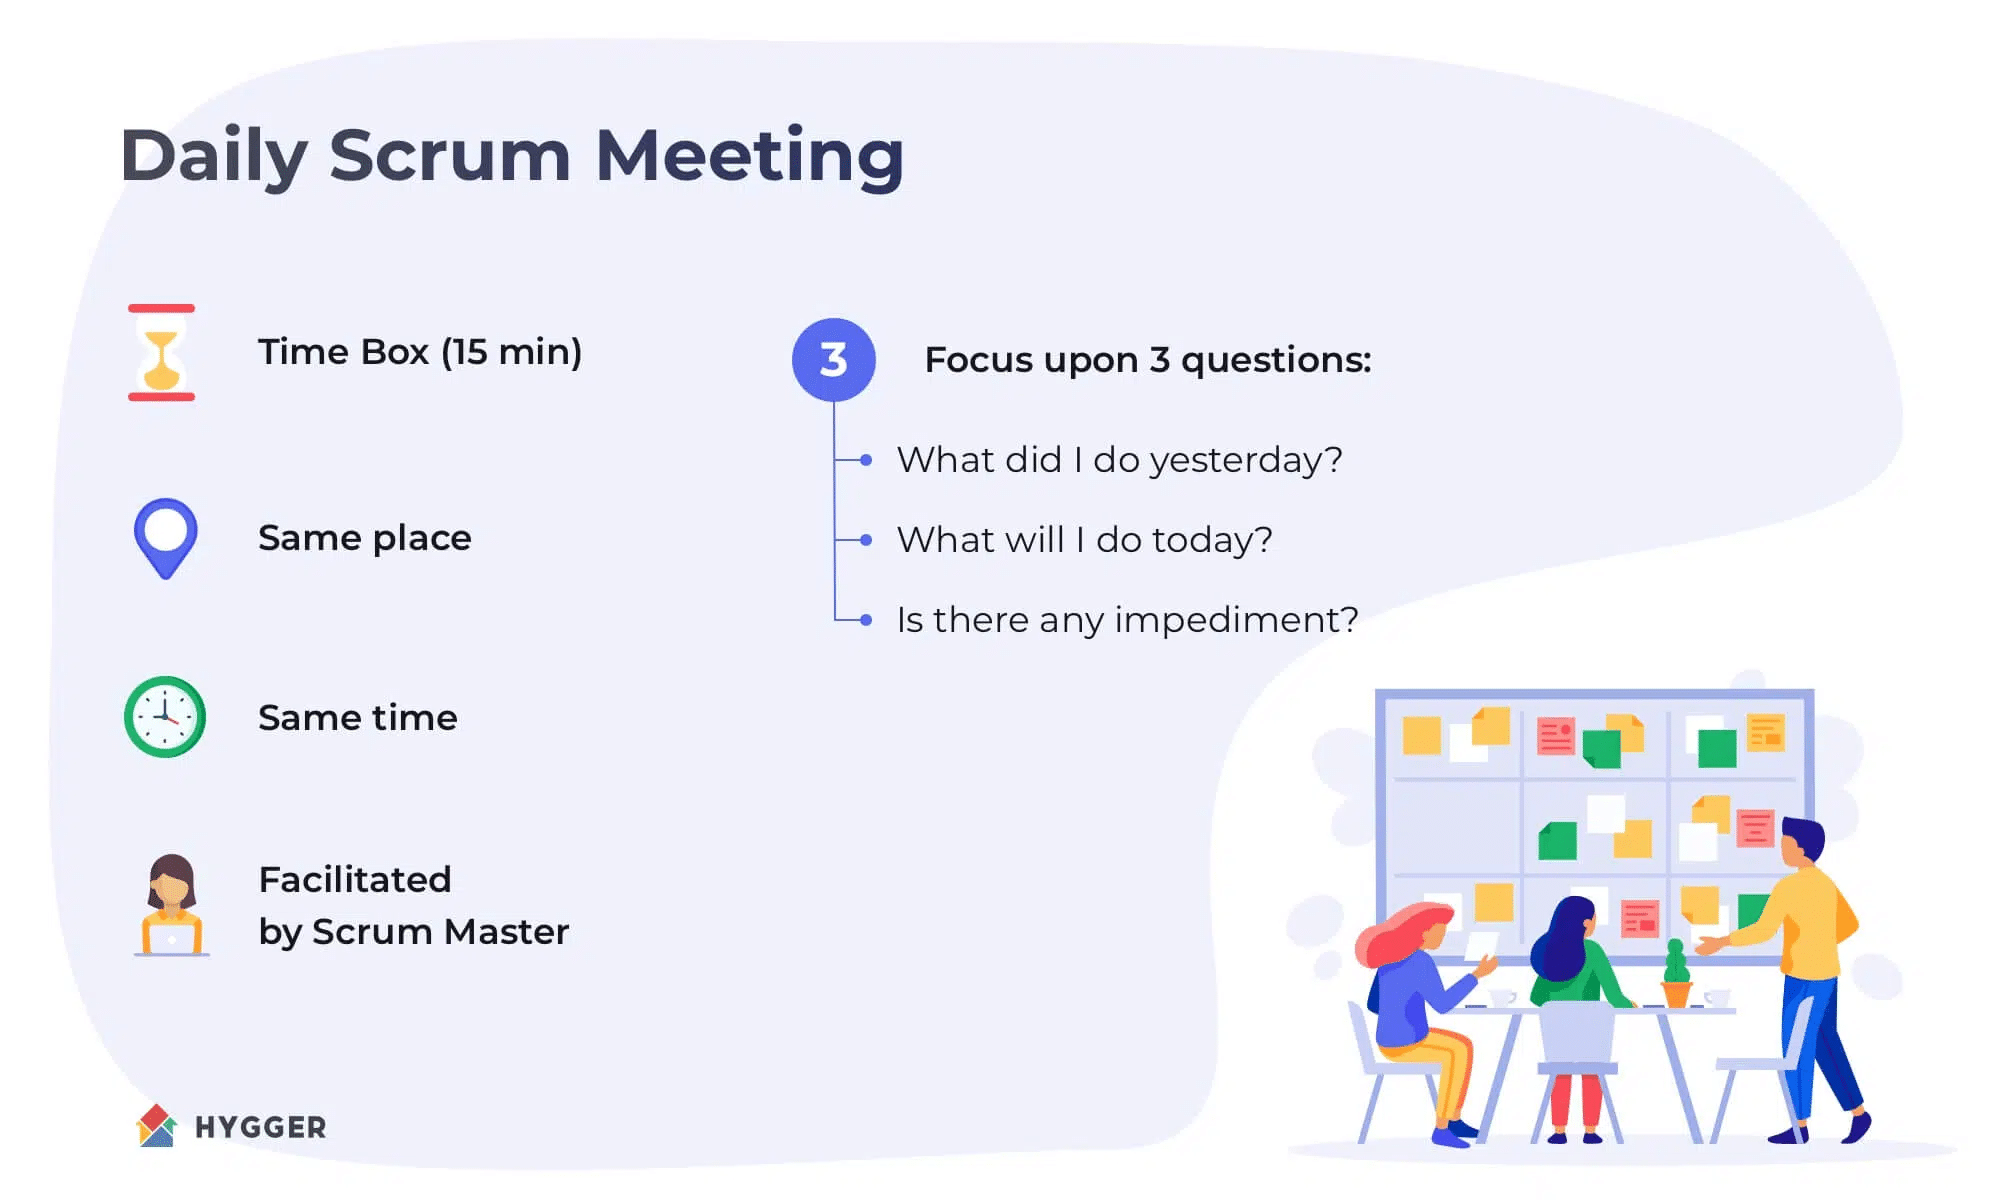 Daily Scrum Meeting Components